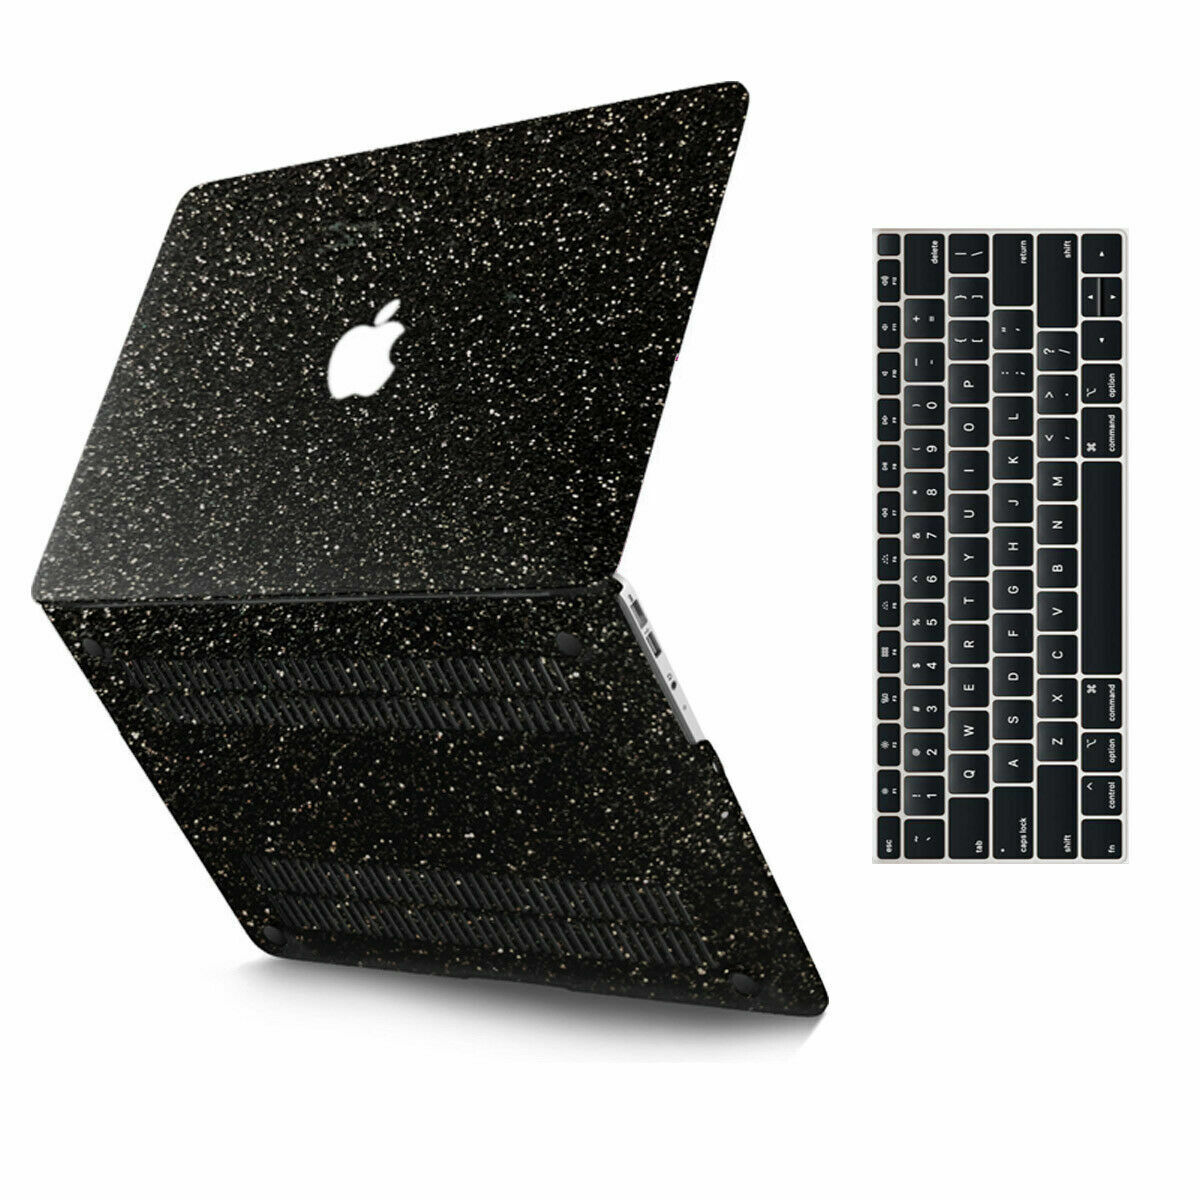 2021 Bling Sparkly Shinny Glitter Rubberized Hard Case Cover For Macbook Pro/Air